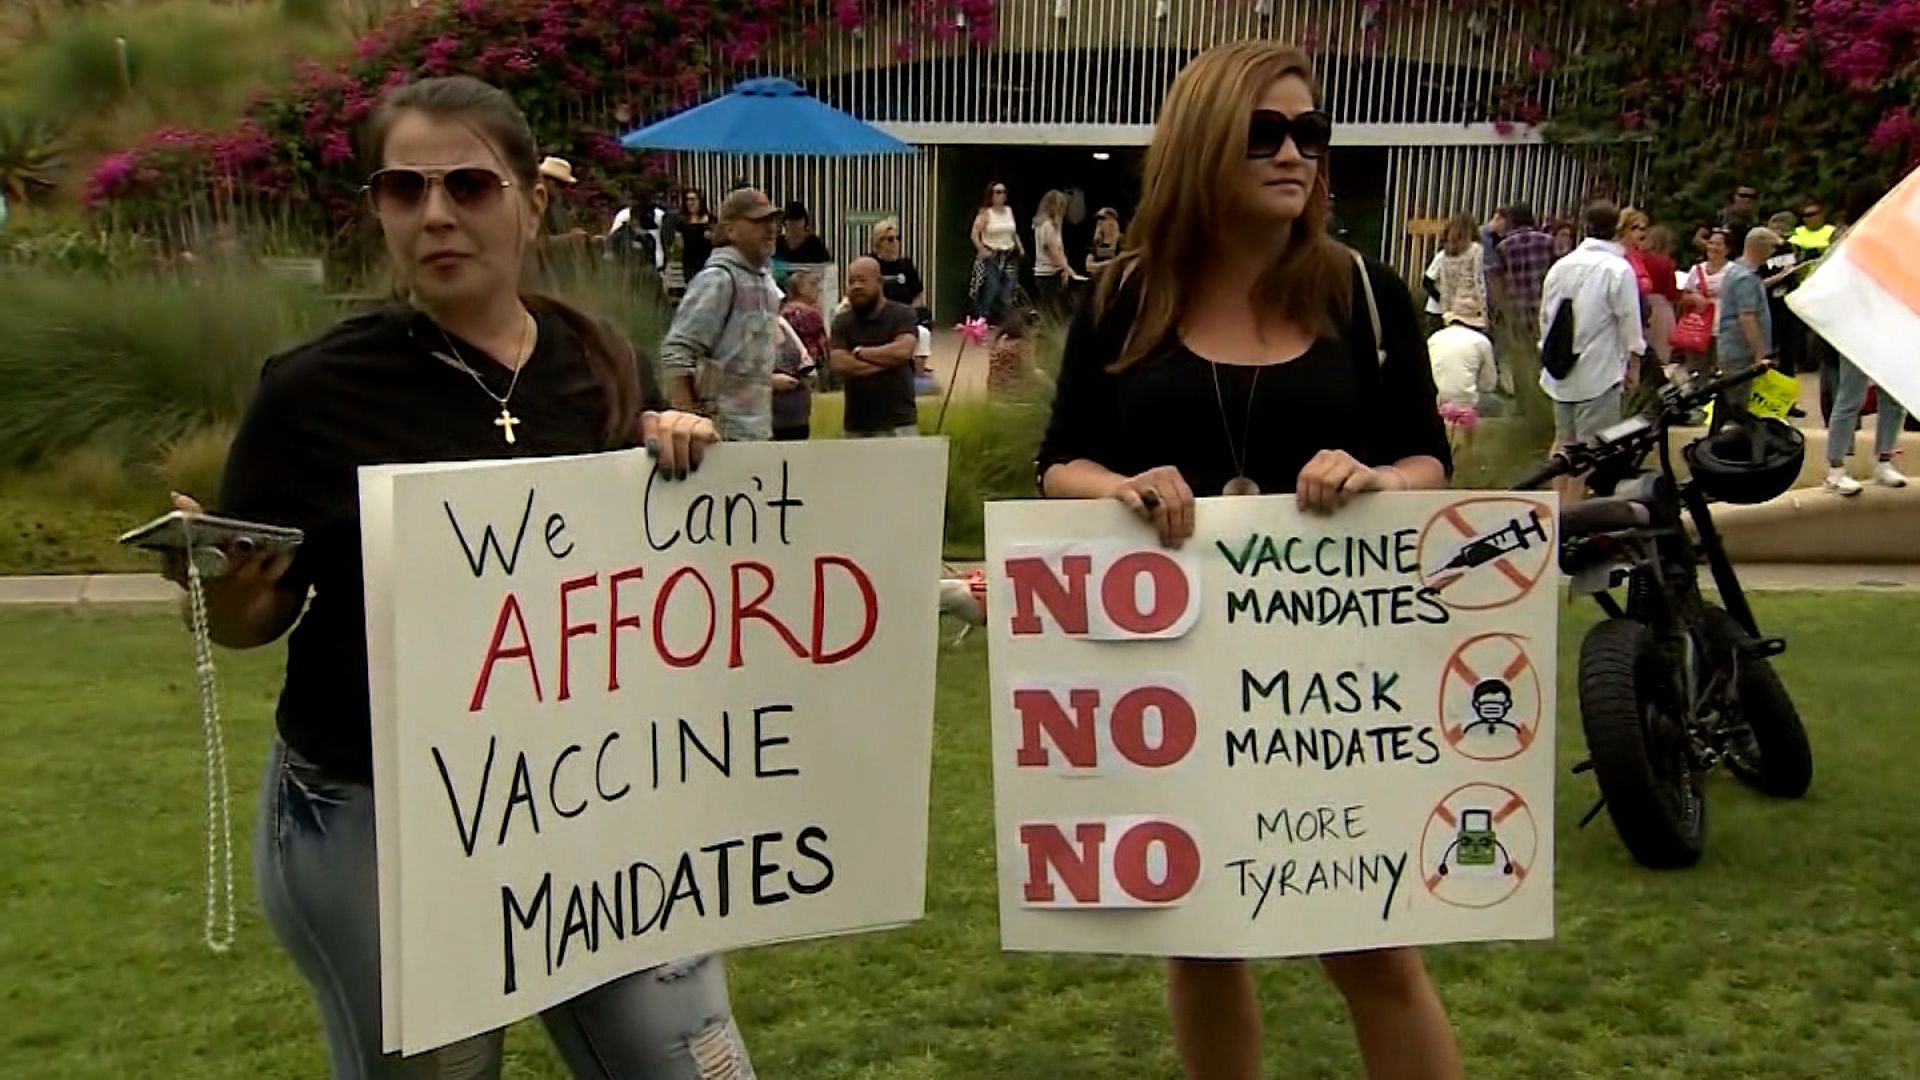 In fighting vaccine denial, facts won't change minds | CNN